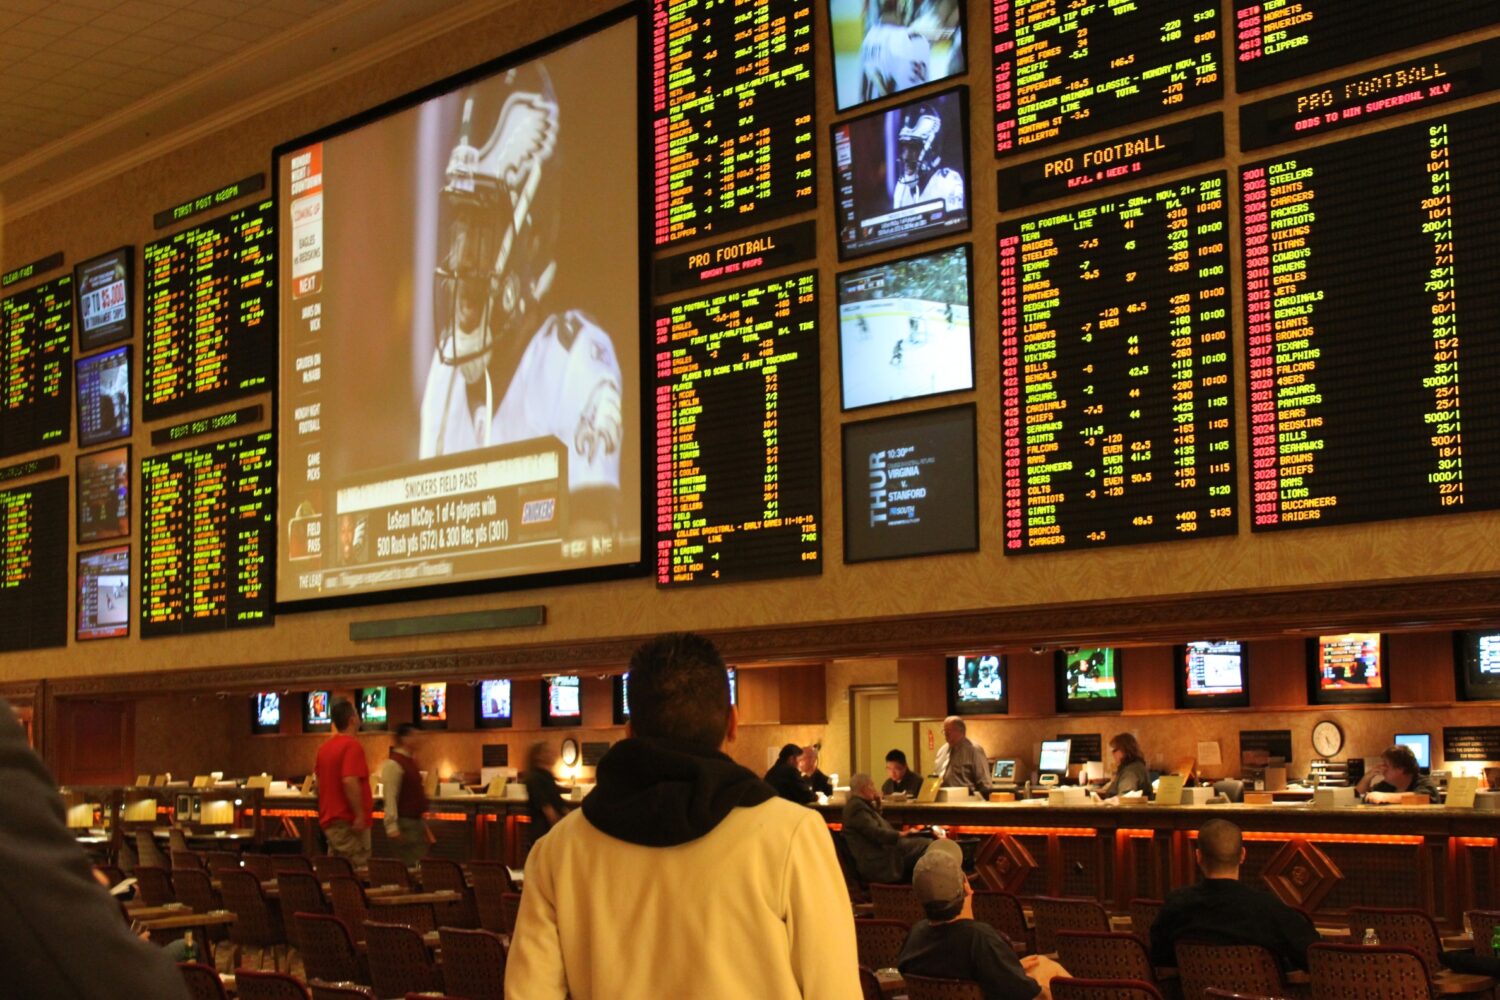 The most popular sports disciplines for betting